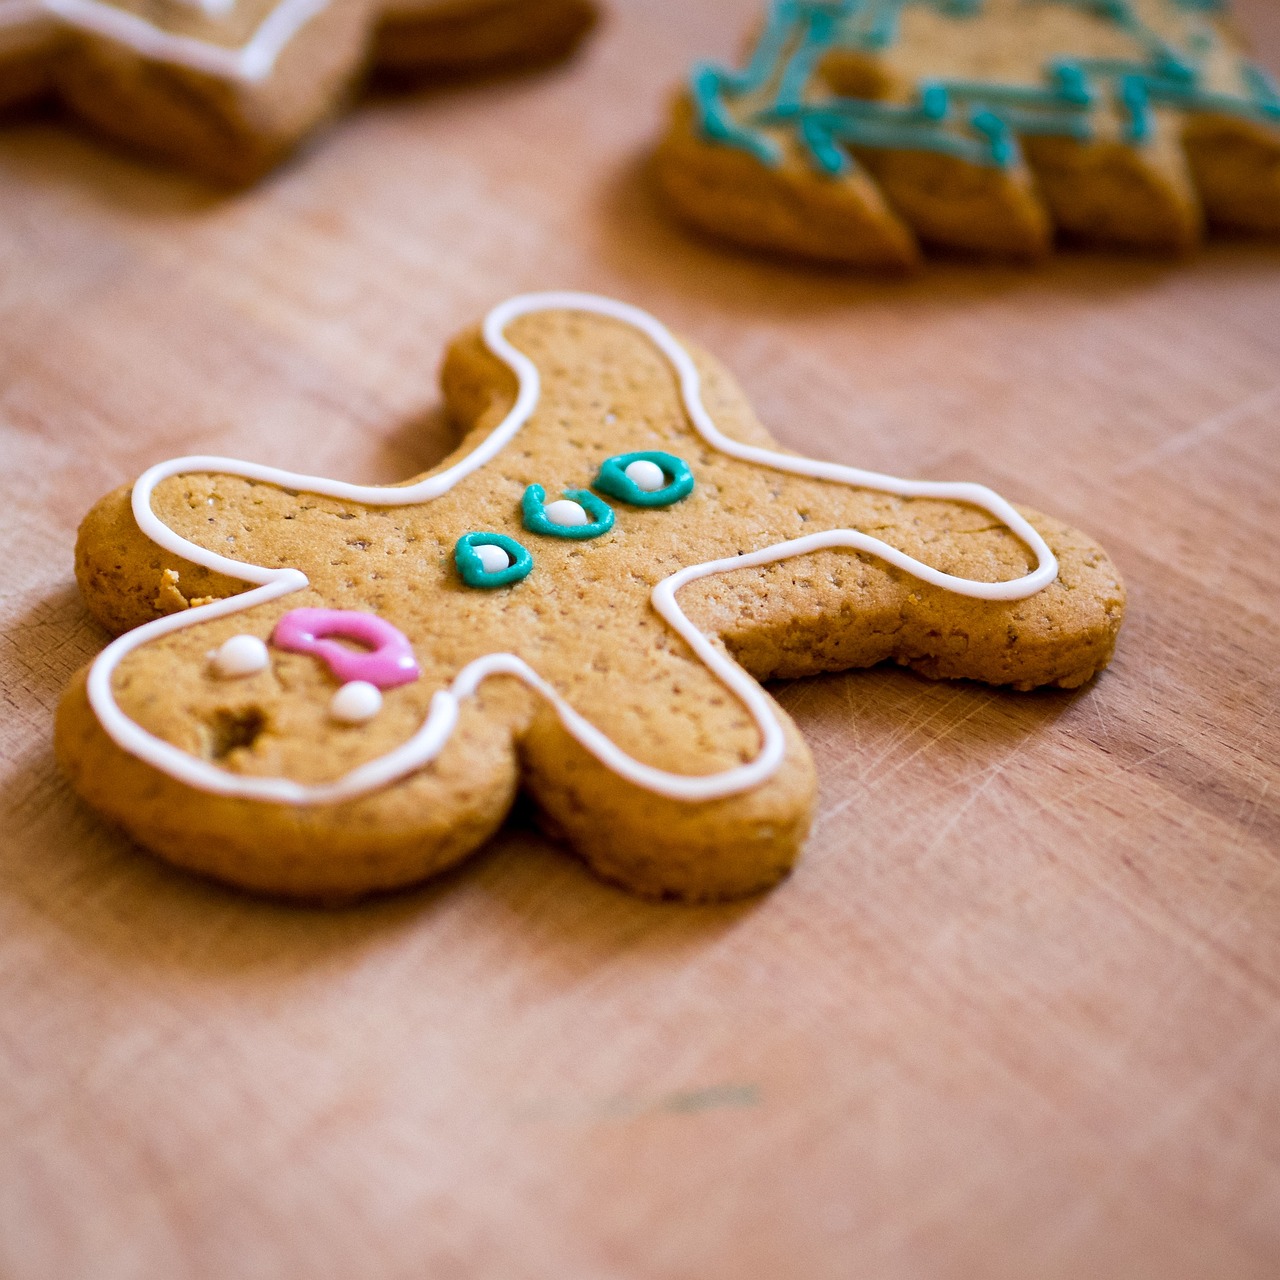 a close up of some cookies on a table, by David Garner, pexels, naive art, gingerbread people, taken with sony a7r camera, with ornamental edges, stock photo